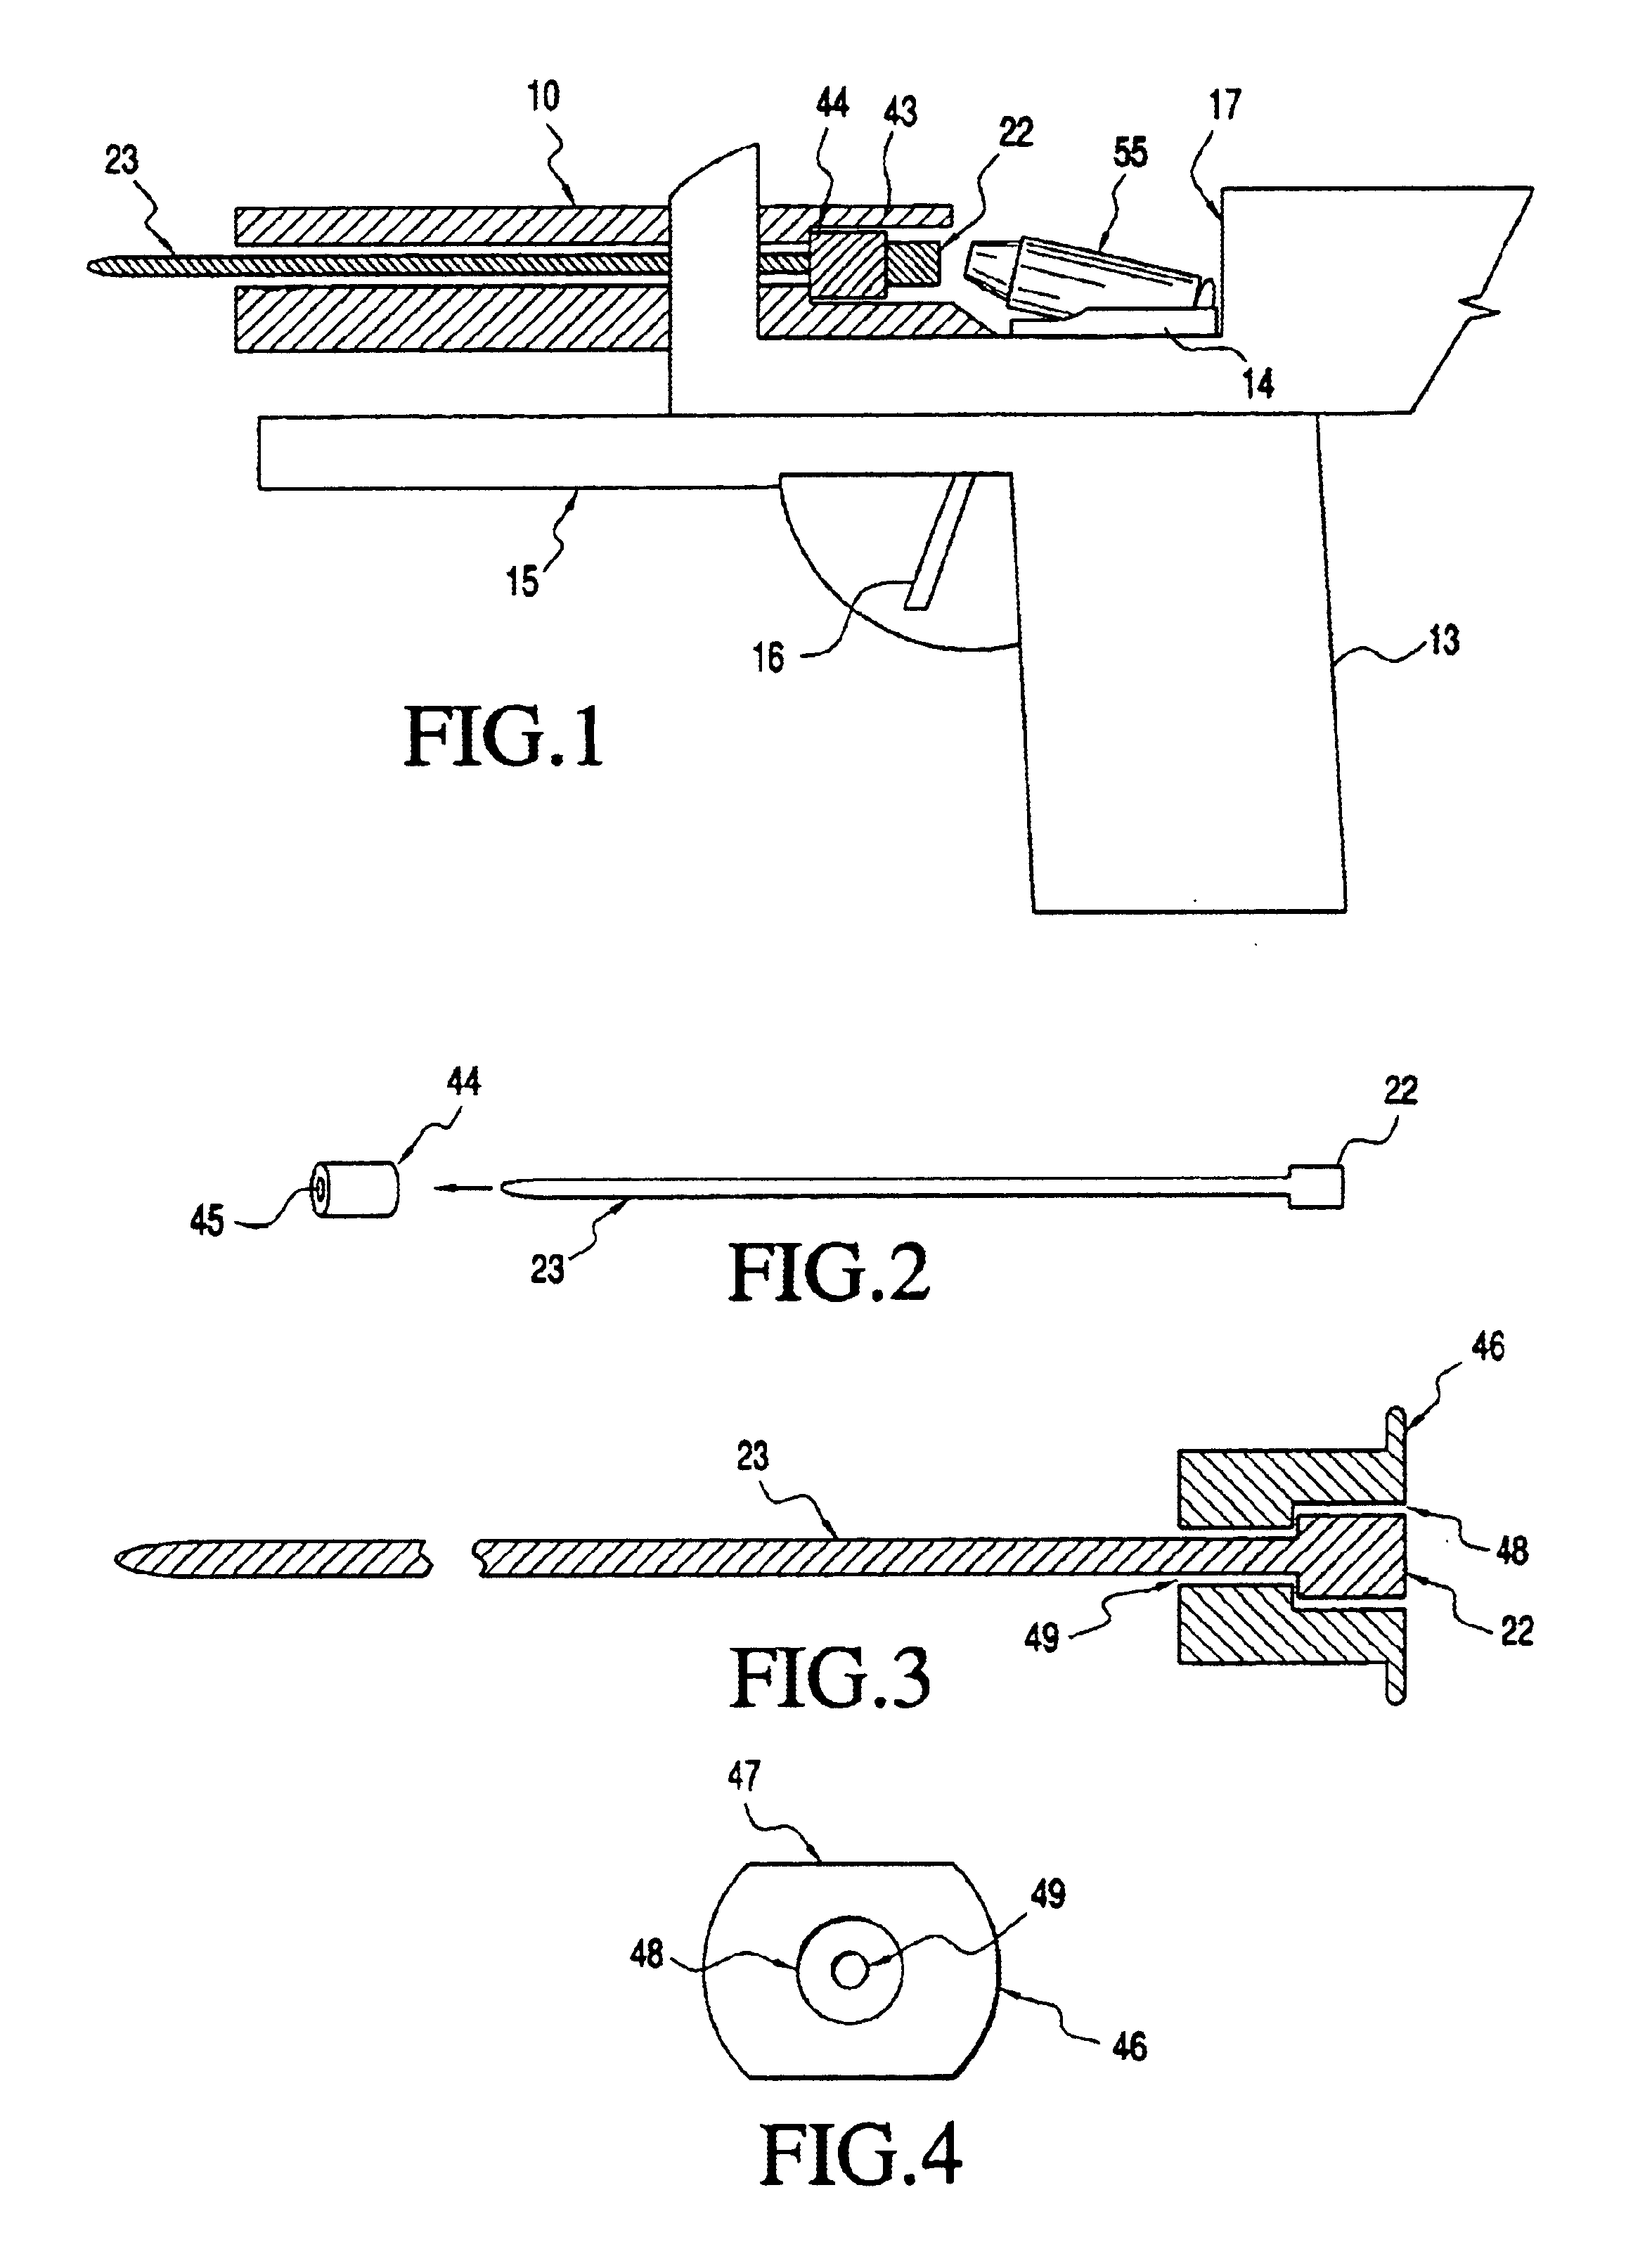 Device for rendering a firearm safe for dry fire practice